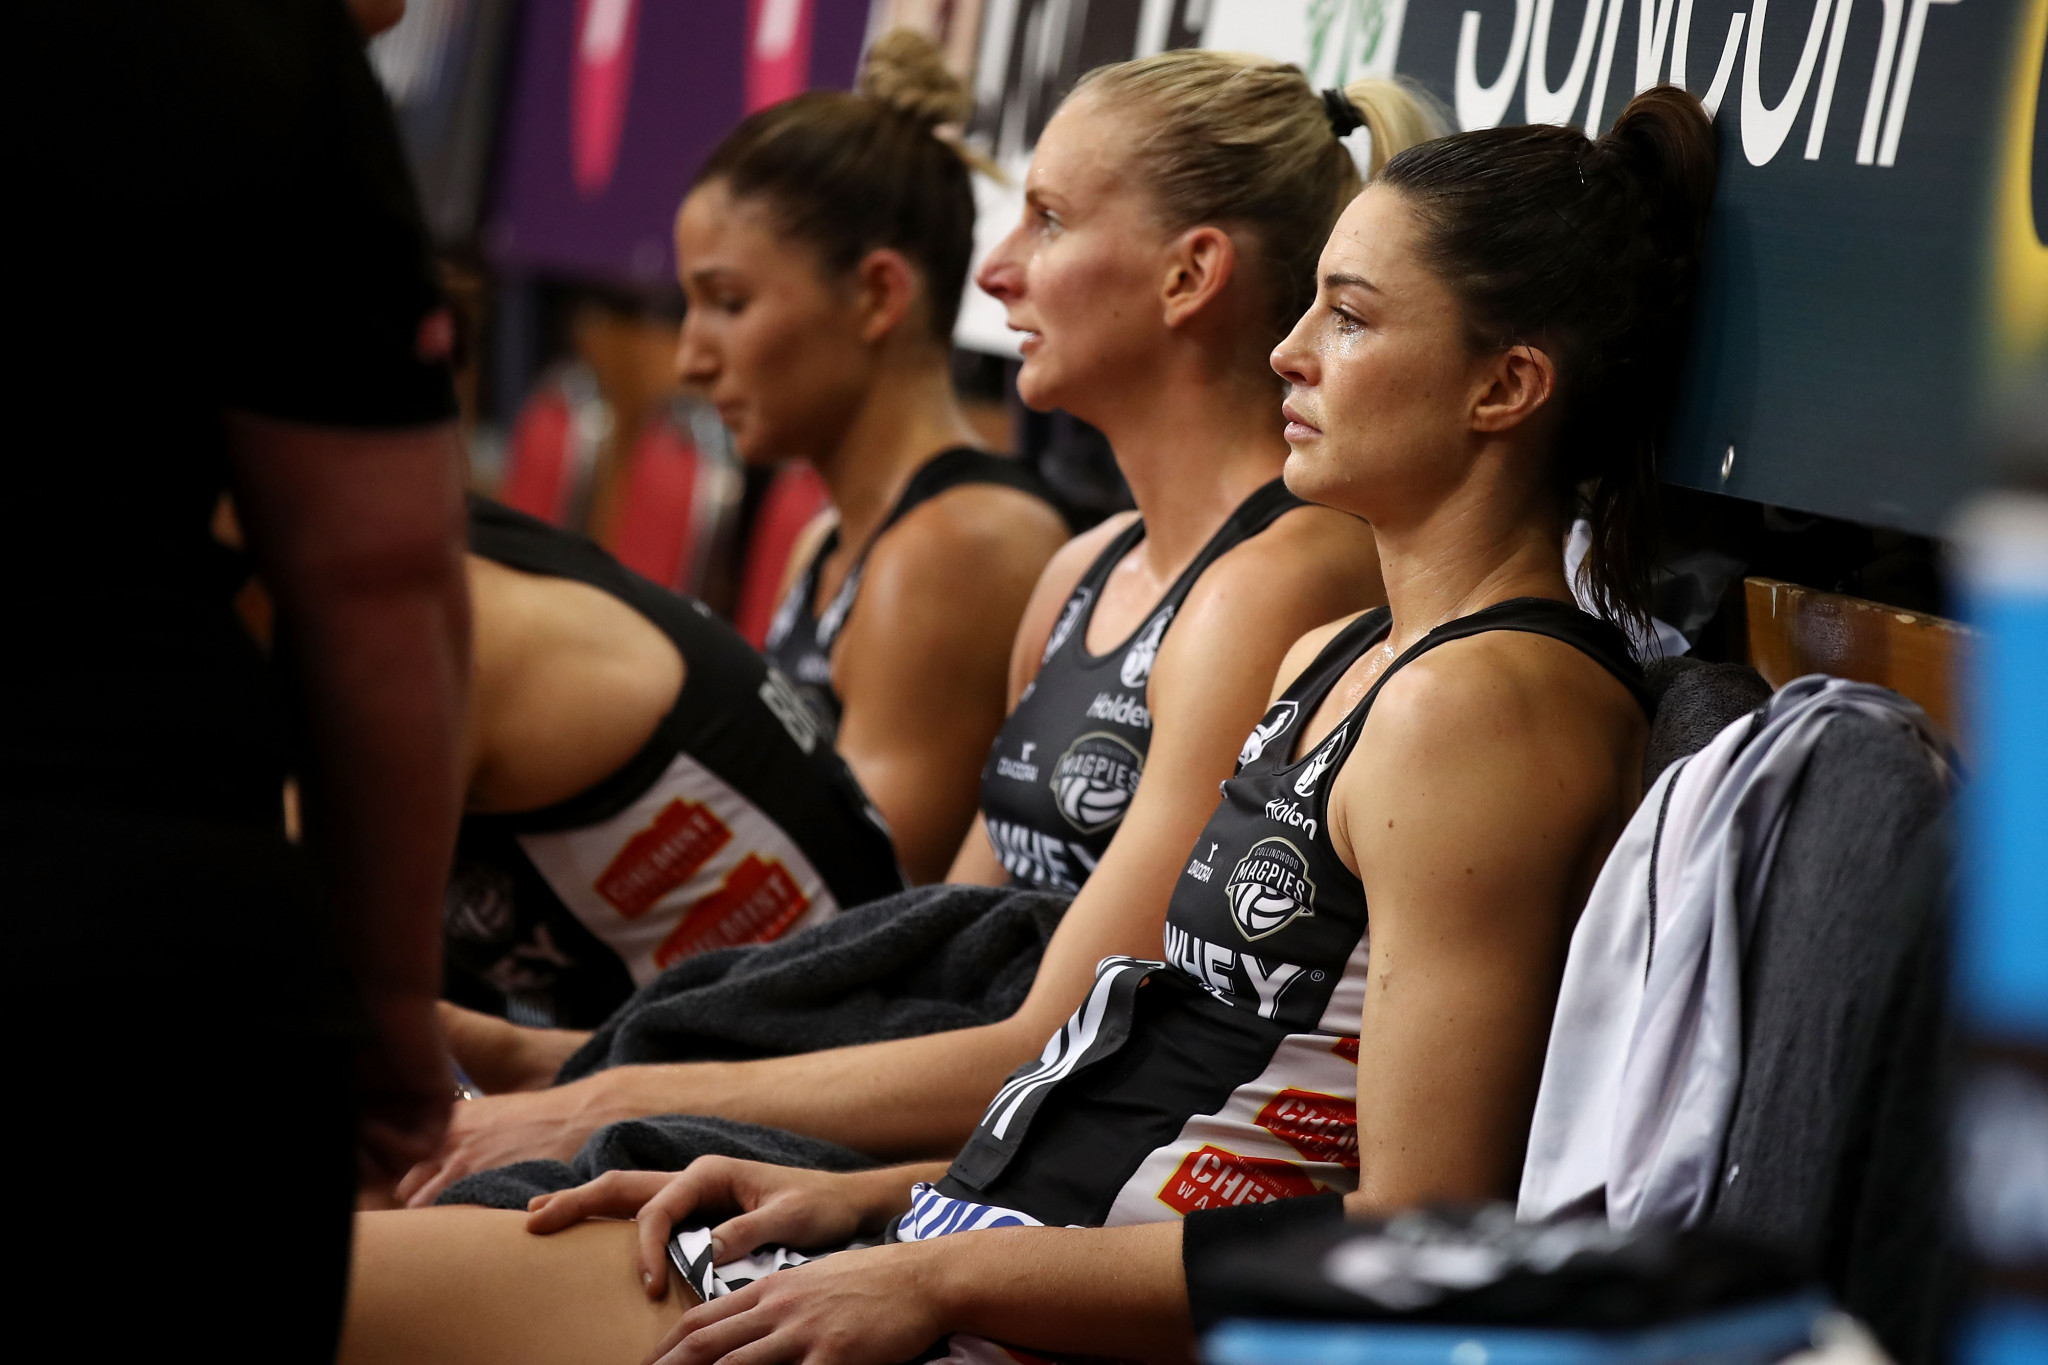 Sharni Layton, right, who has been recalled to play for Australia's netball team in the Quad Series in January 2018 in London and Johannesburg ©Getty Images